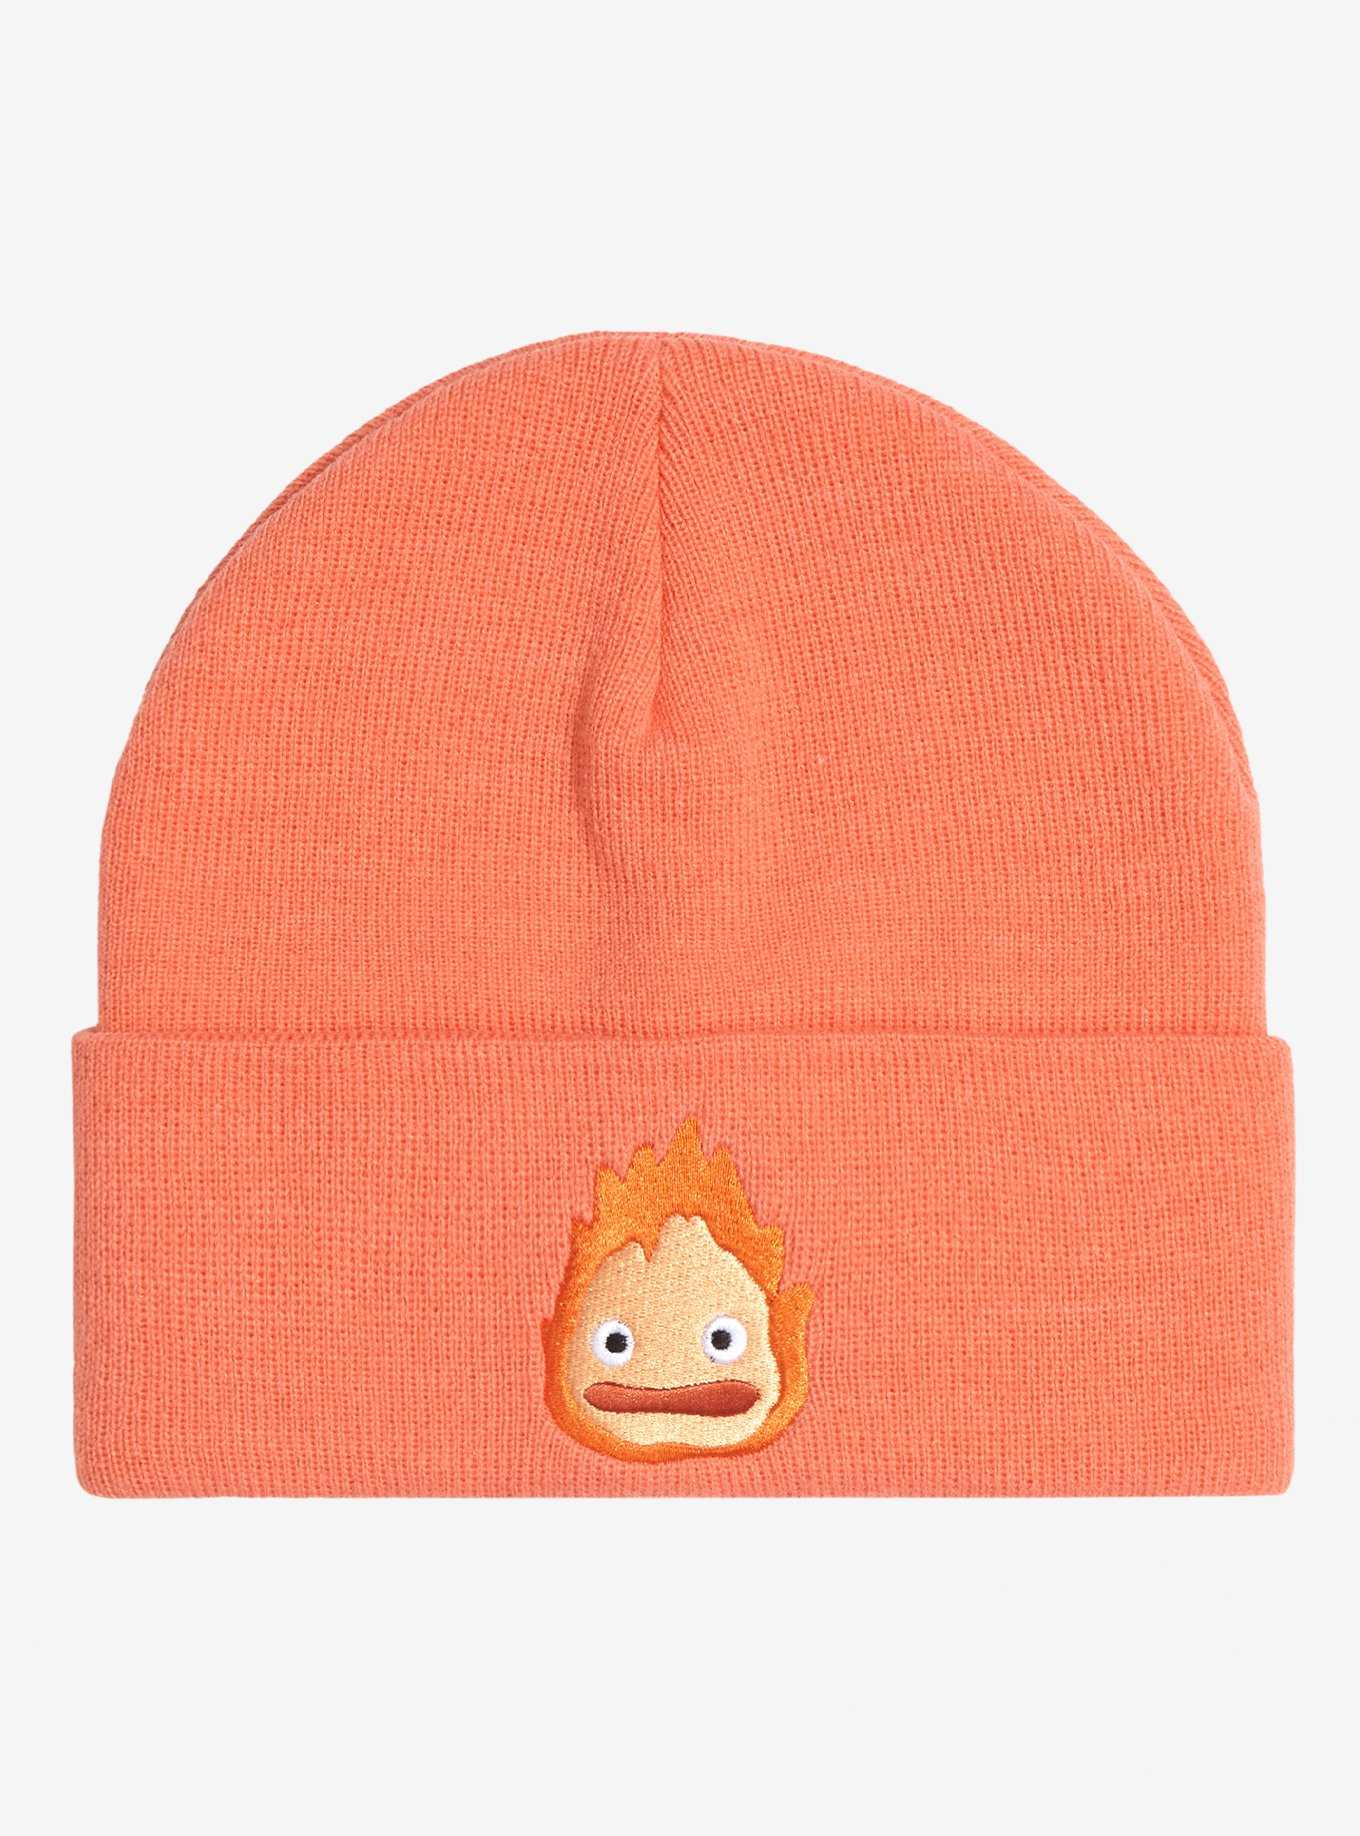 Cool Beanies: Slouchy, Trendy & Beanies BoxLunch Culture Pop 